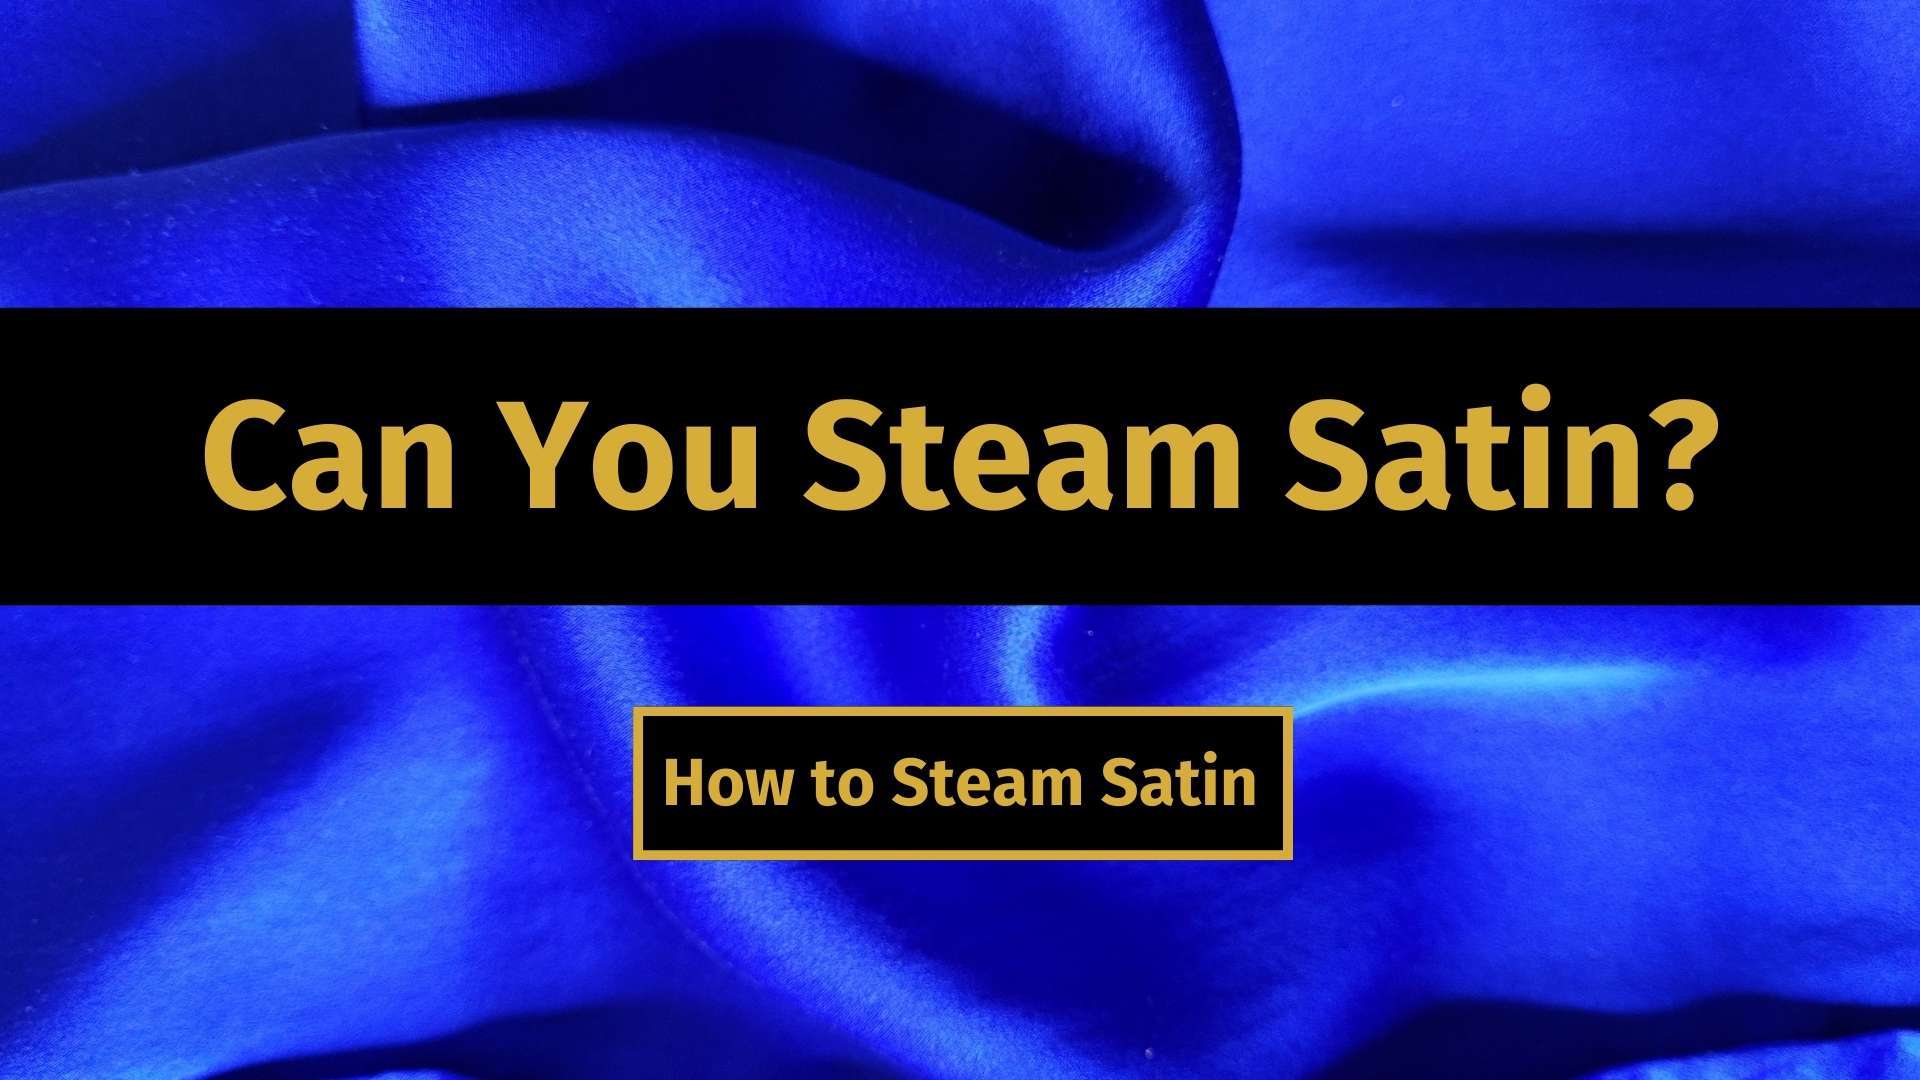 can you steam satin banner image 